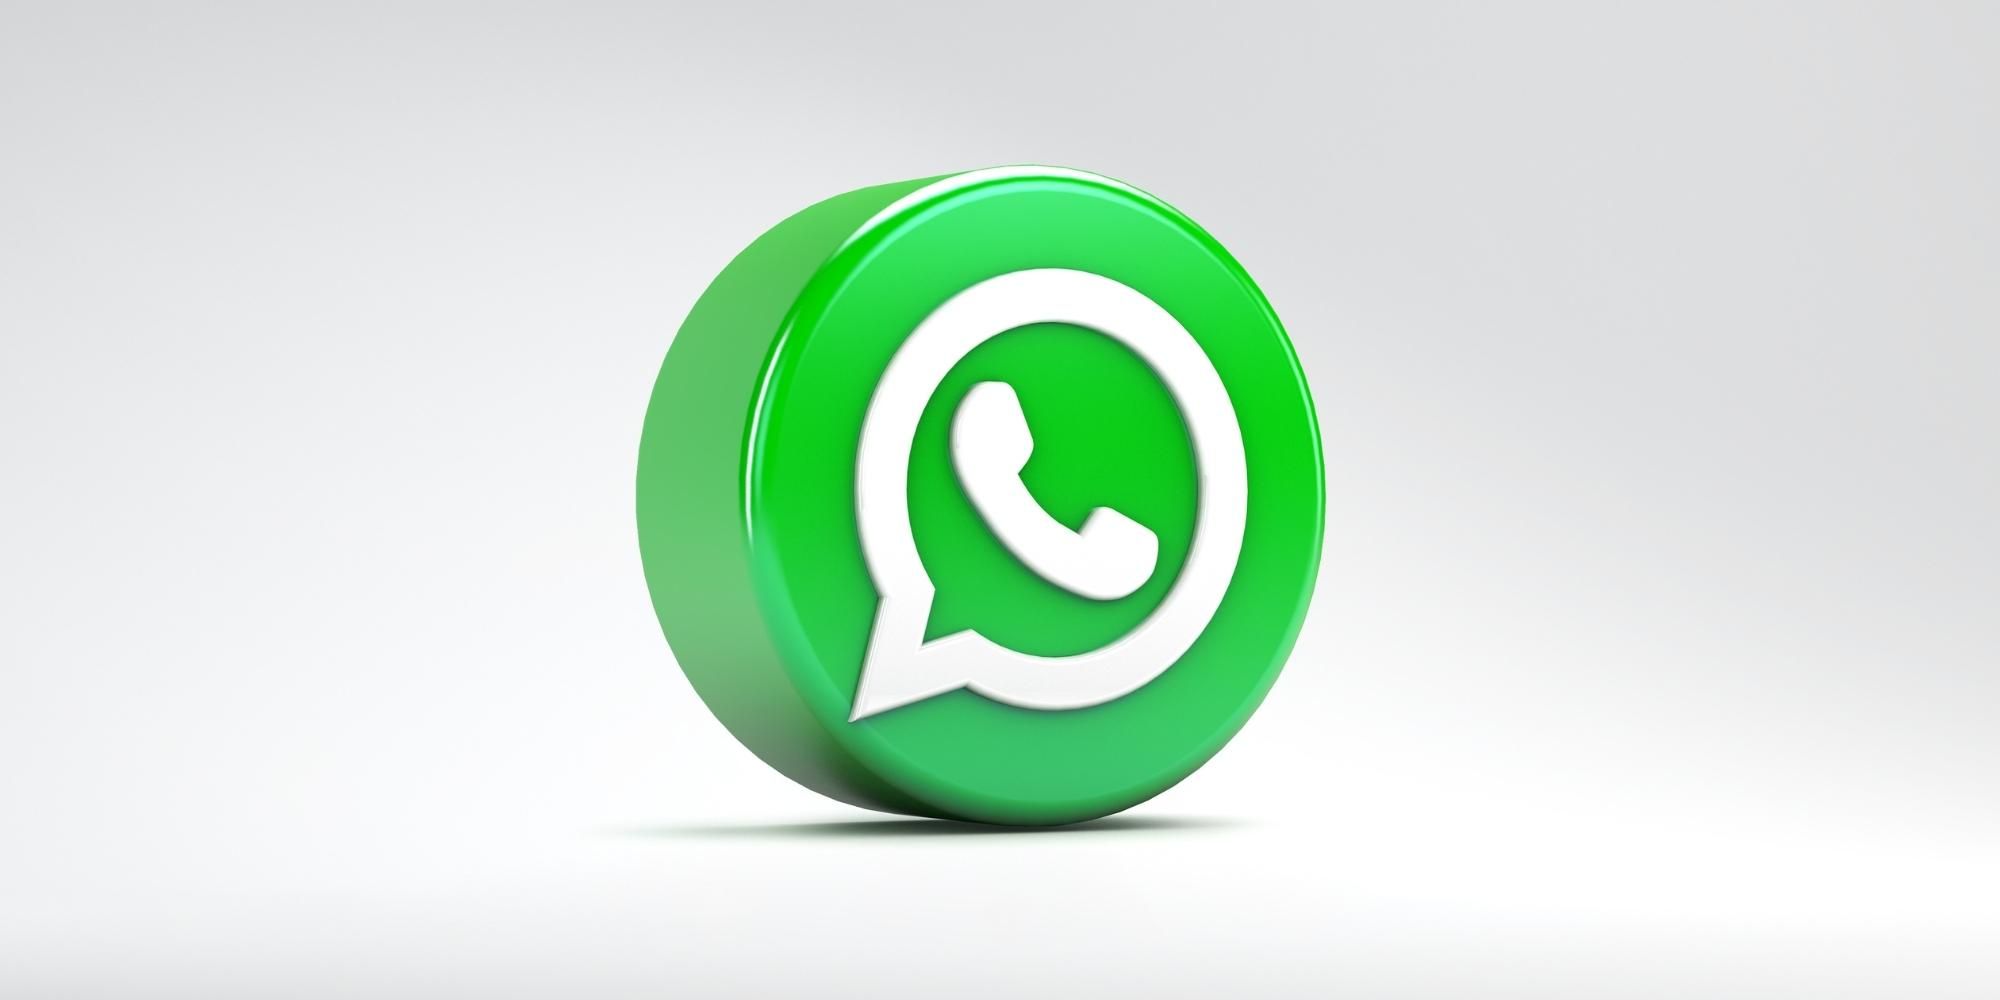 How To Change Chat Wallpaper On WhatsApp